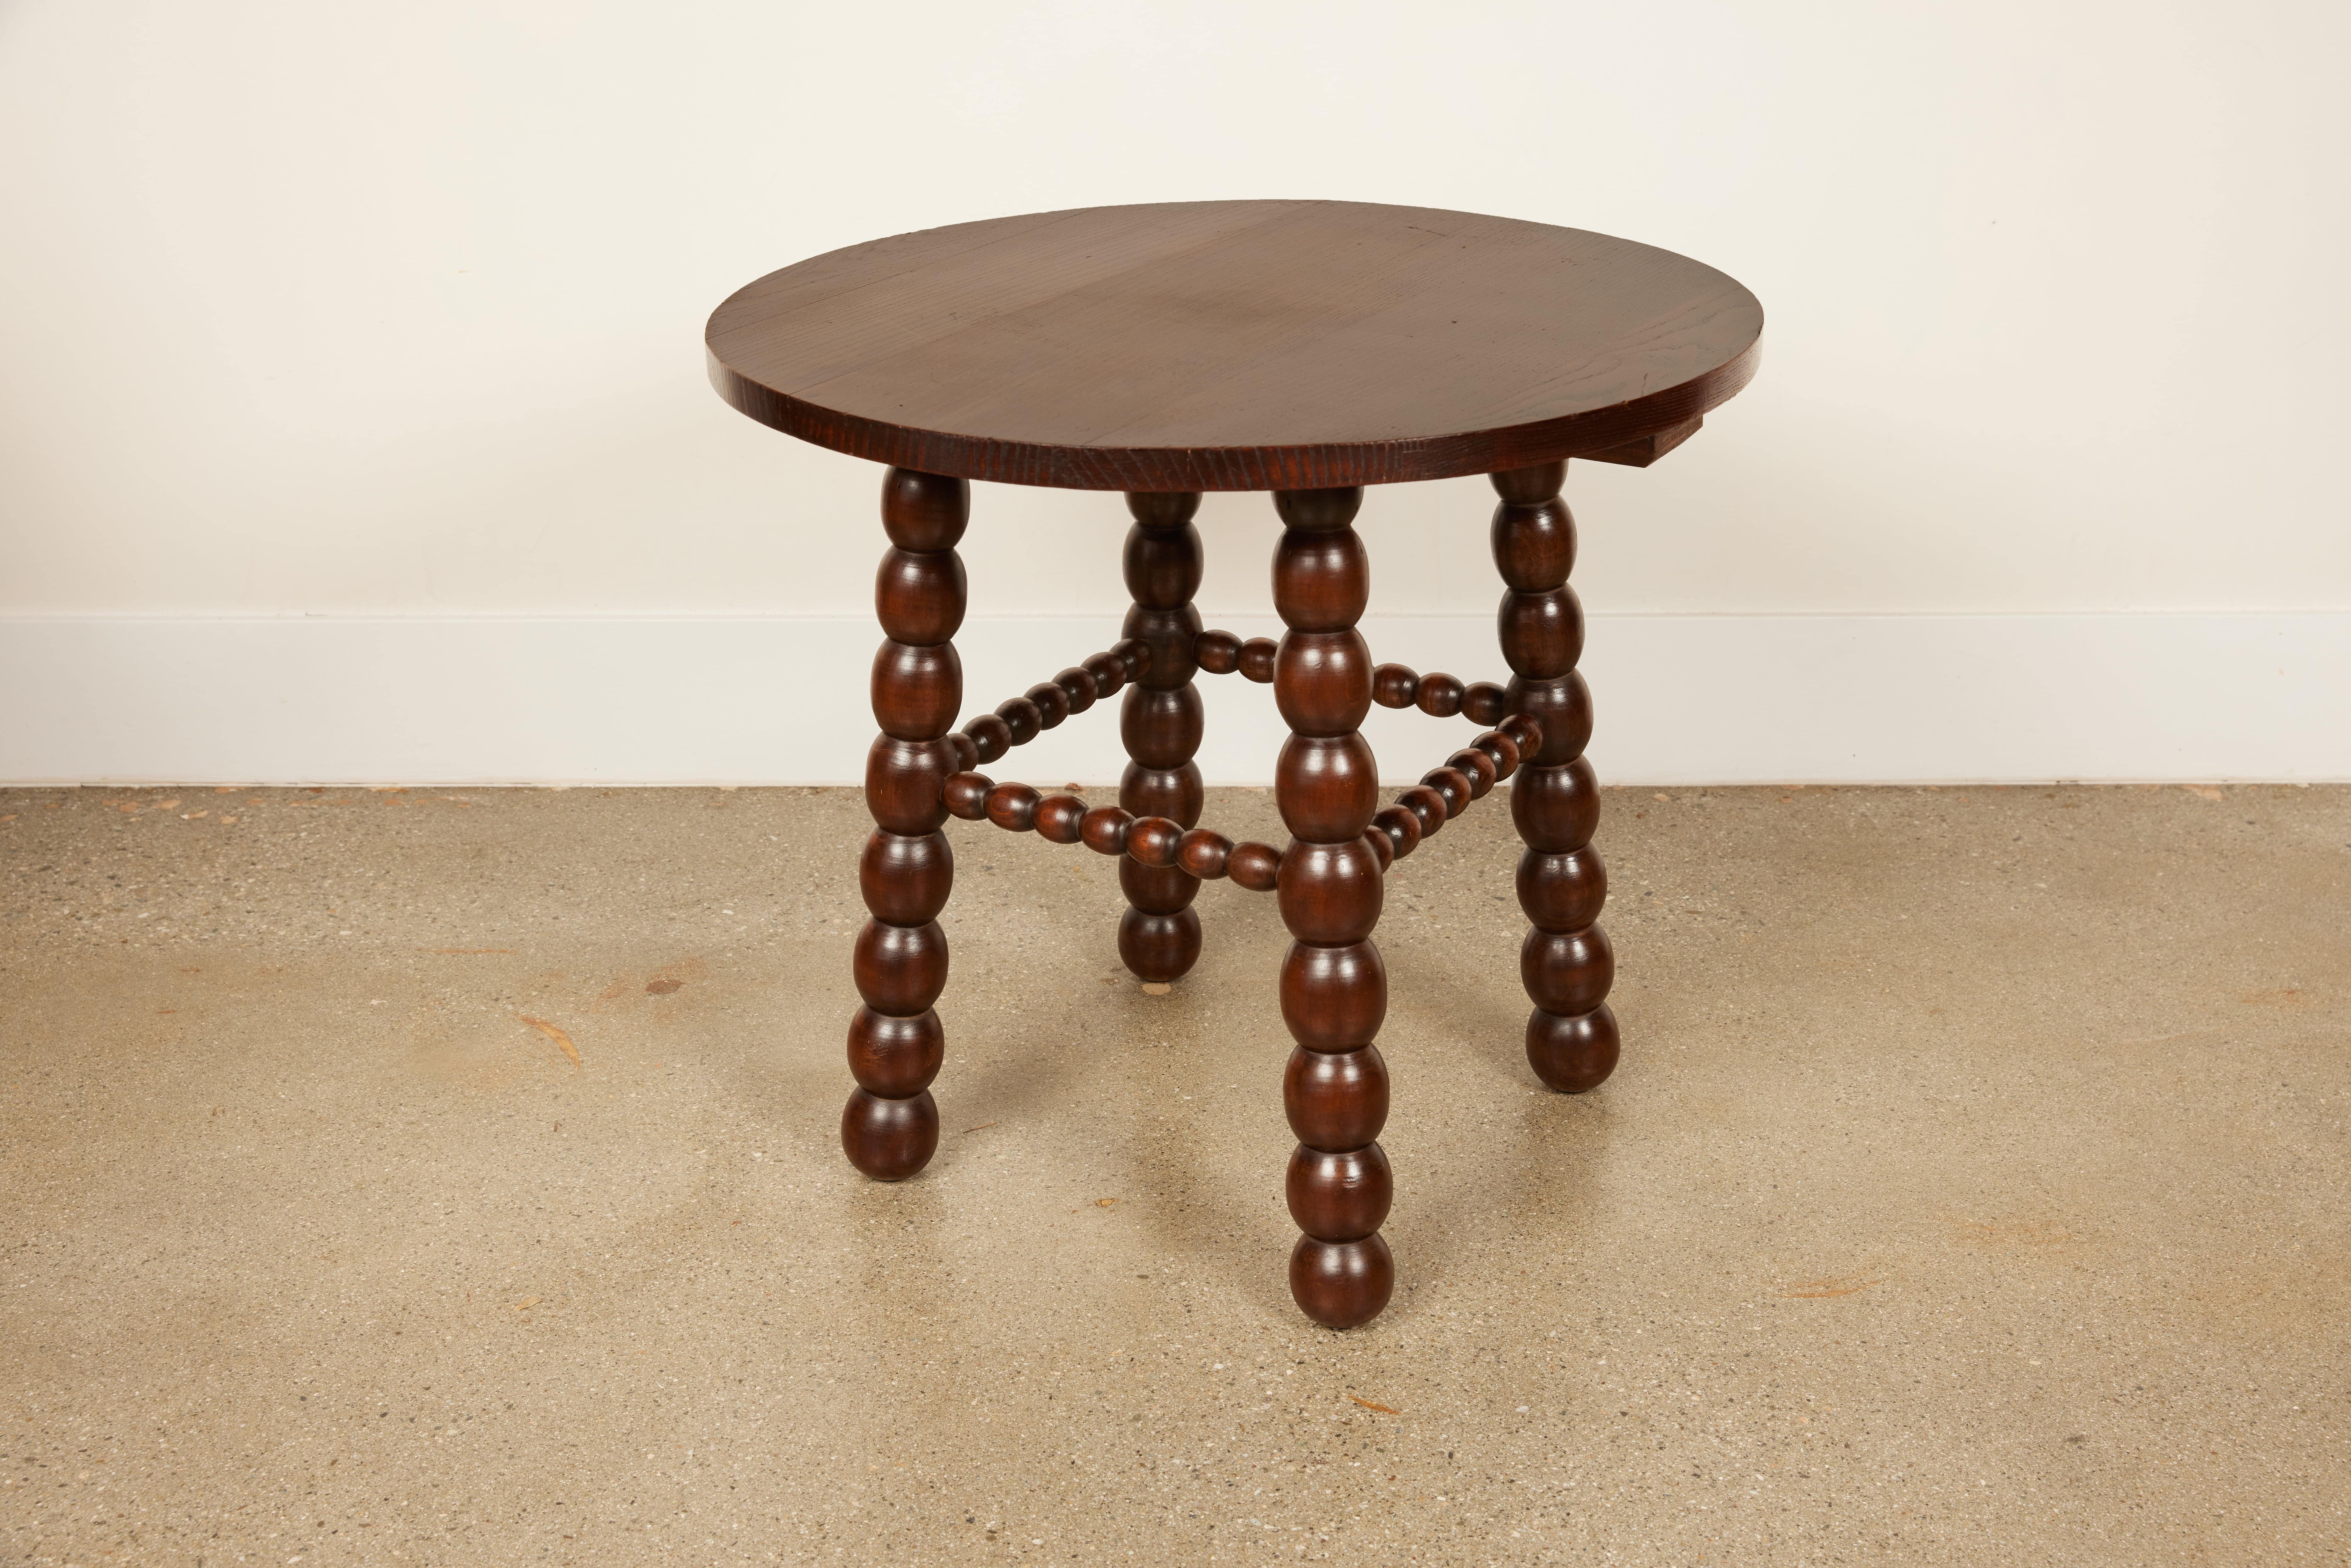 Discover the elegance of mid-century French design with our authentic 1940s Bobbin Table. Crafted from rich mahogany and preserved in its original condition, this piece features a 23